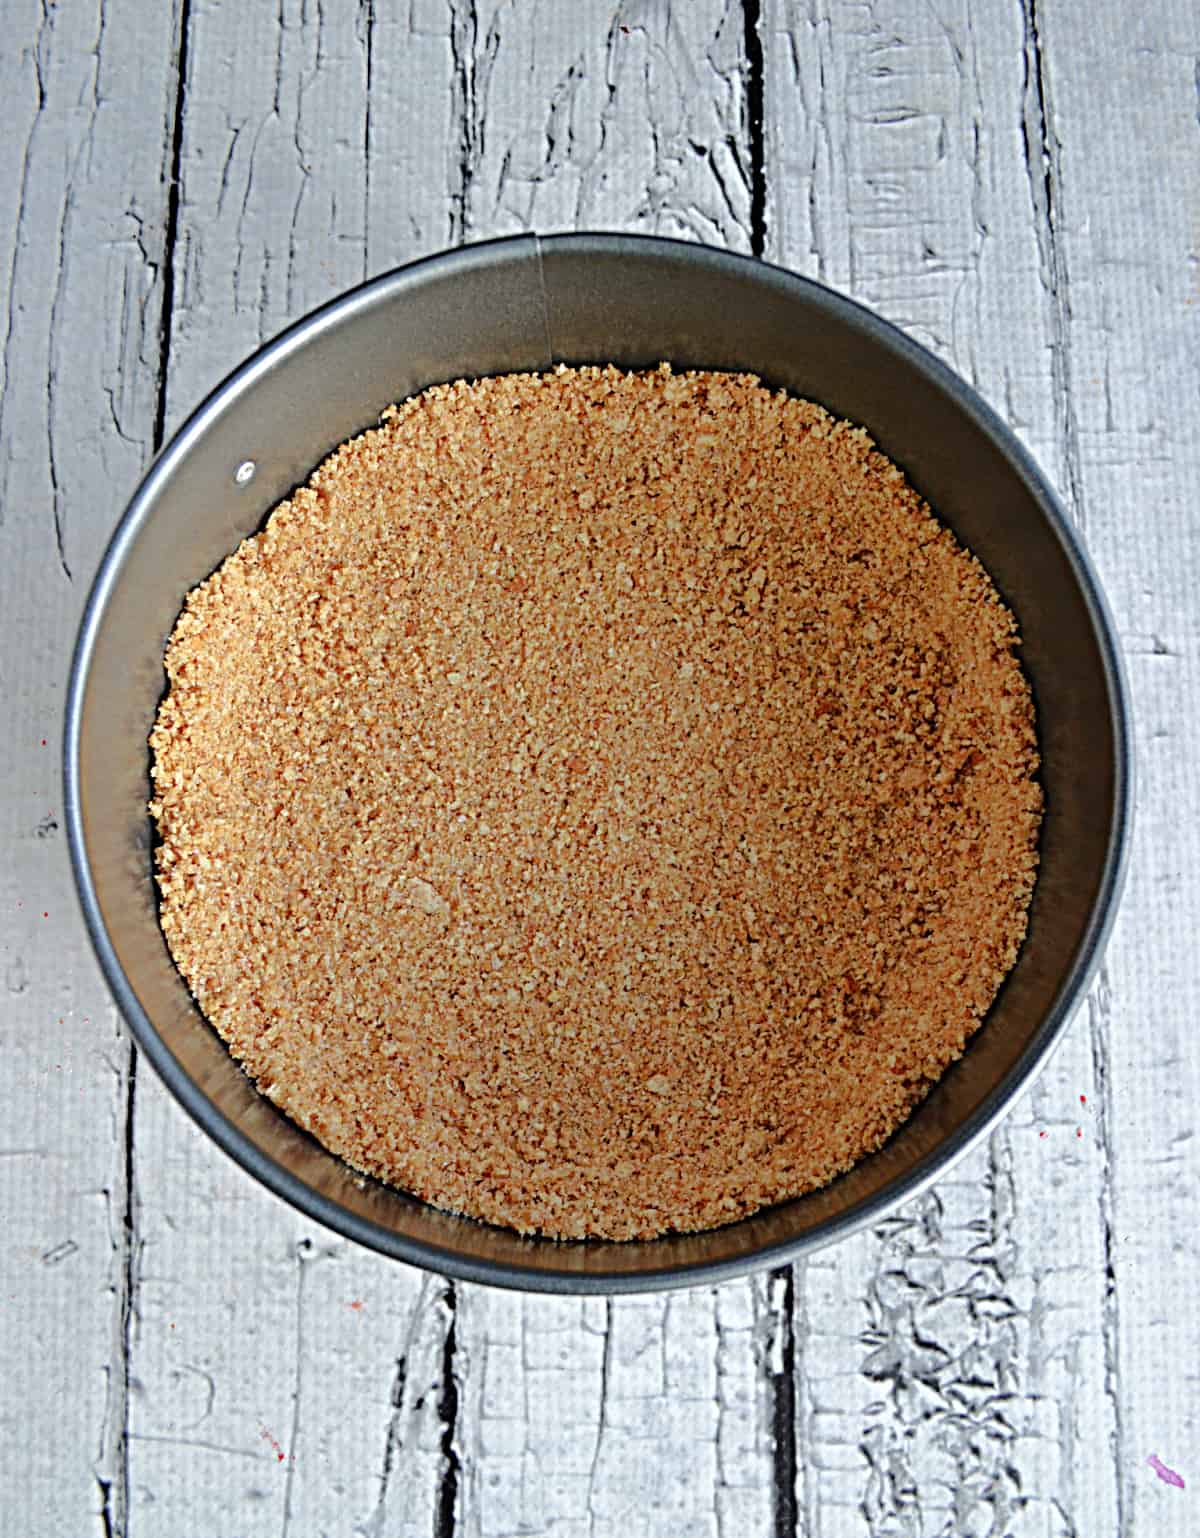 Graham cracker crust in a spring form pan.